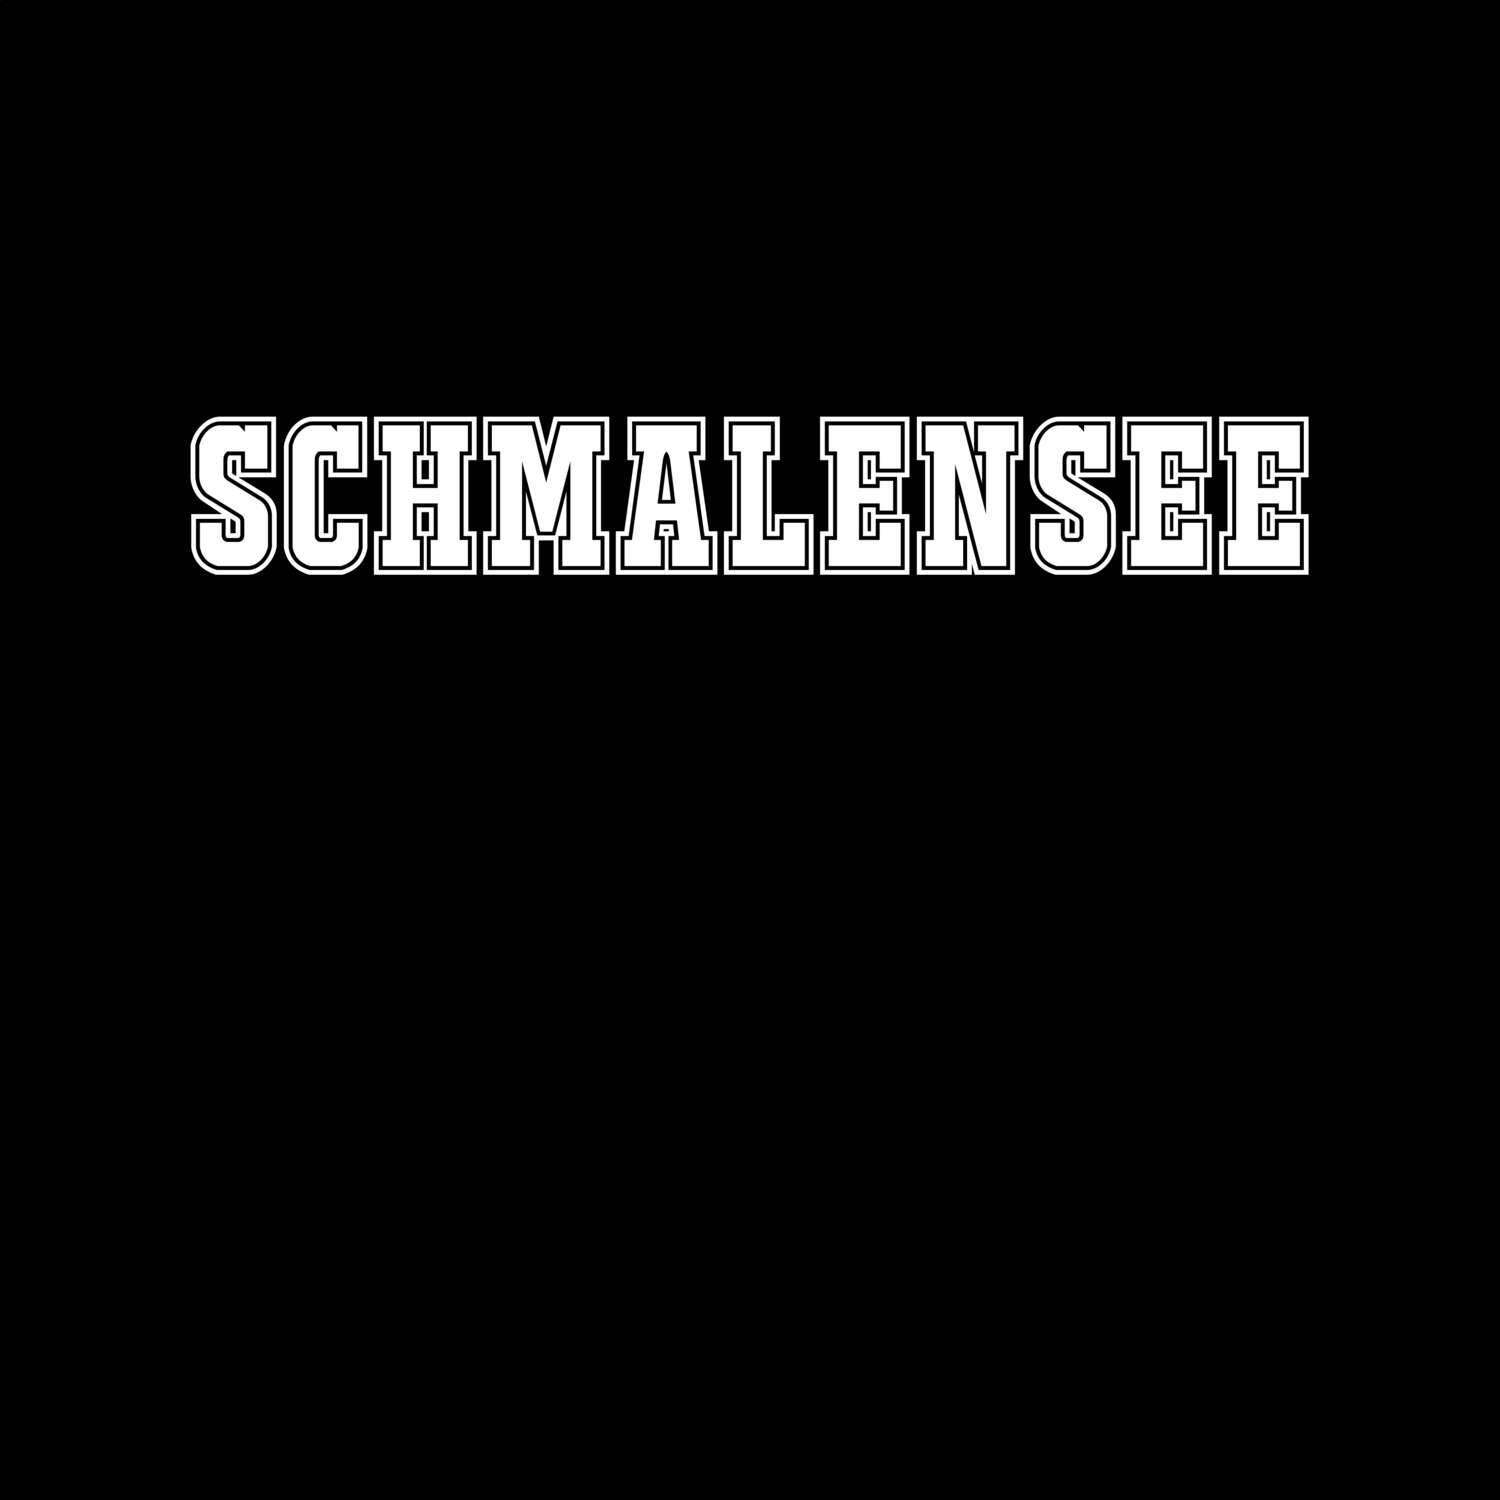 Schmalensee T-Shirt »Classic«